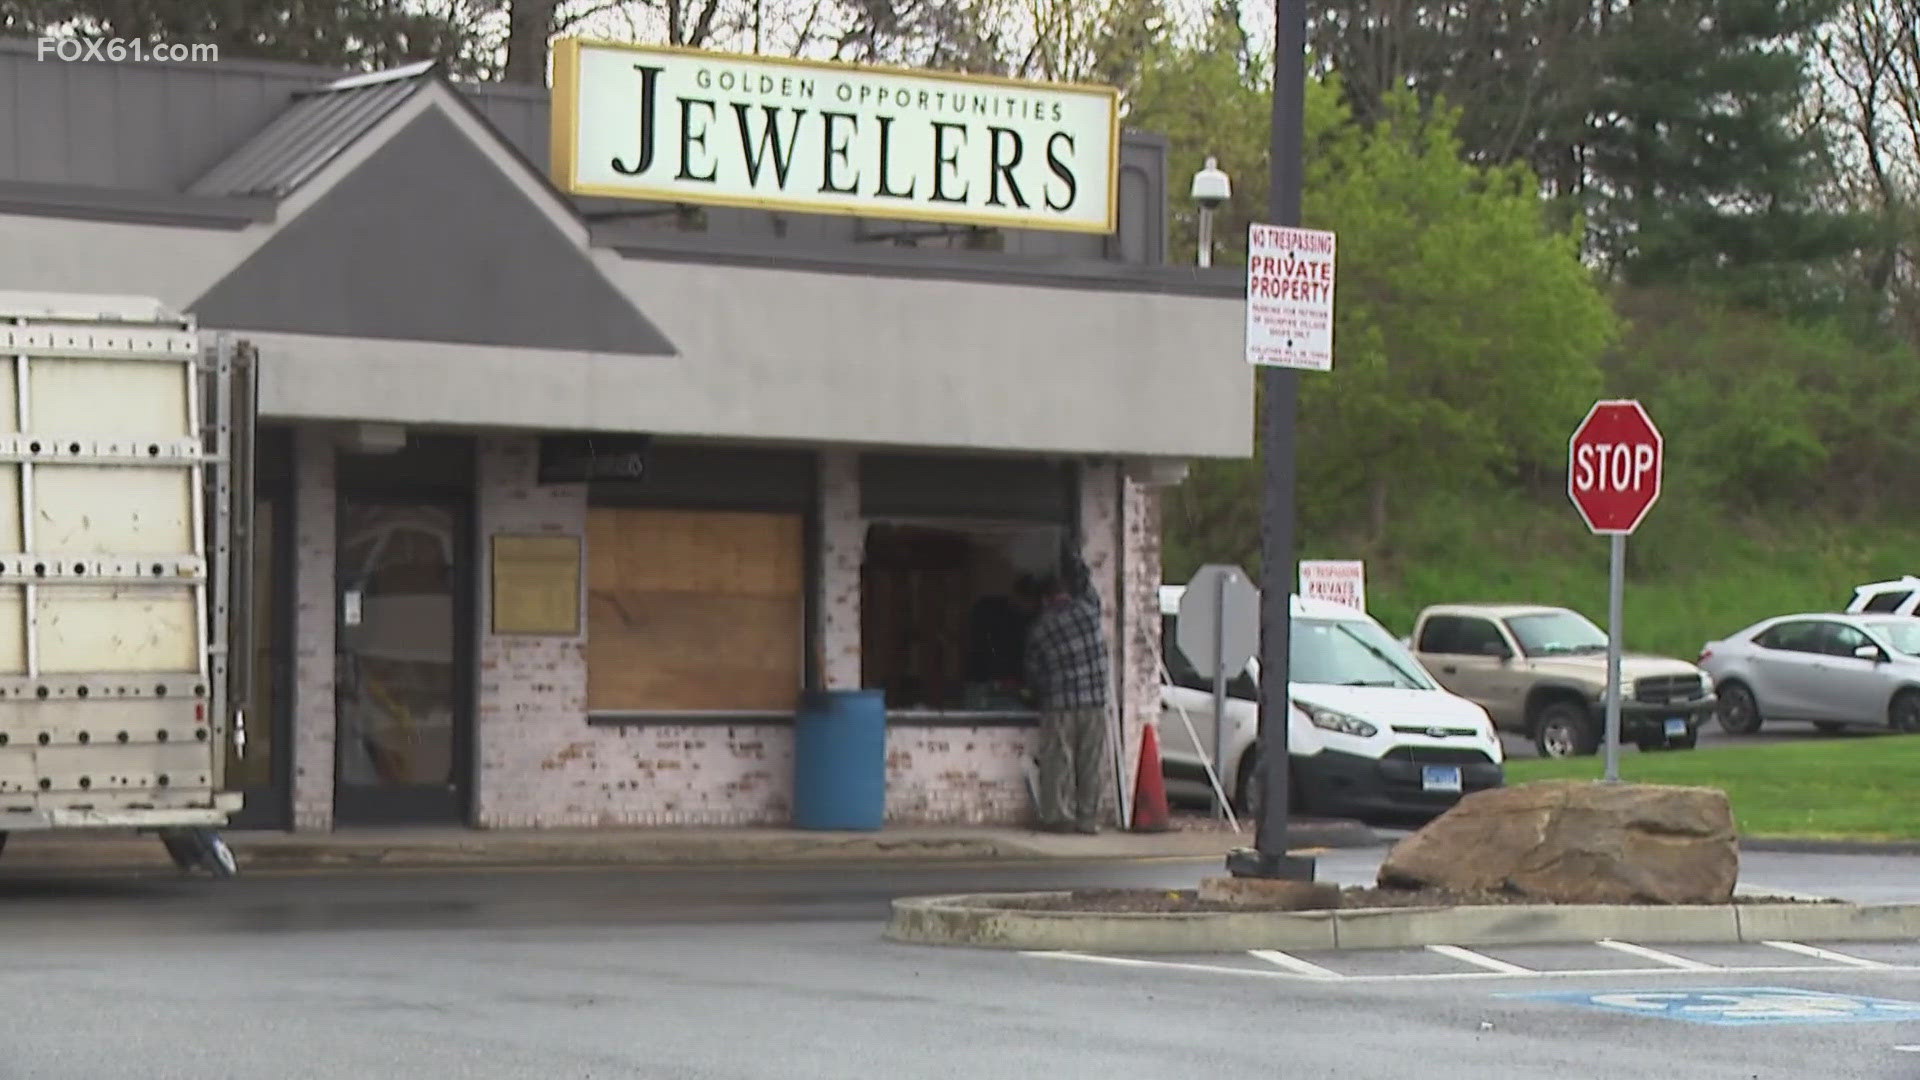 The jewelry store has been hit twice in the past several weeks. Multiple businesses in the plaza have been broken into since the start of 2023.